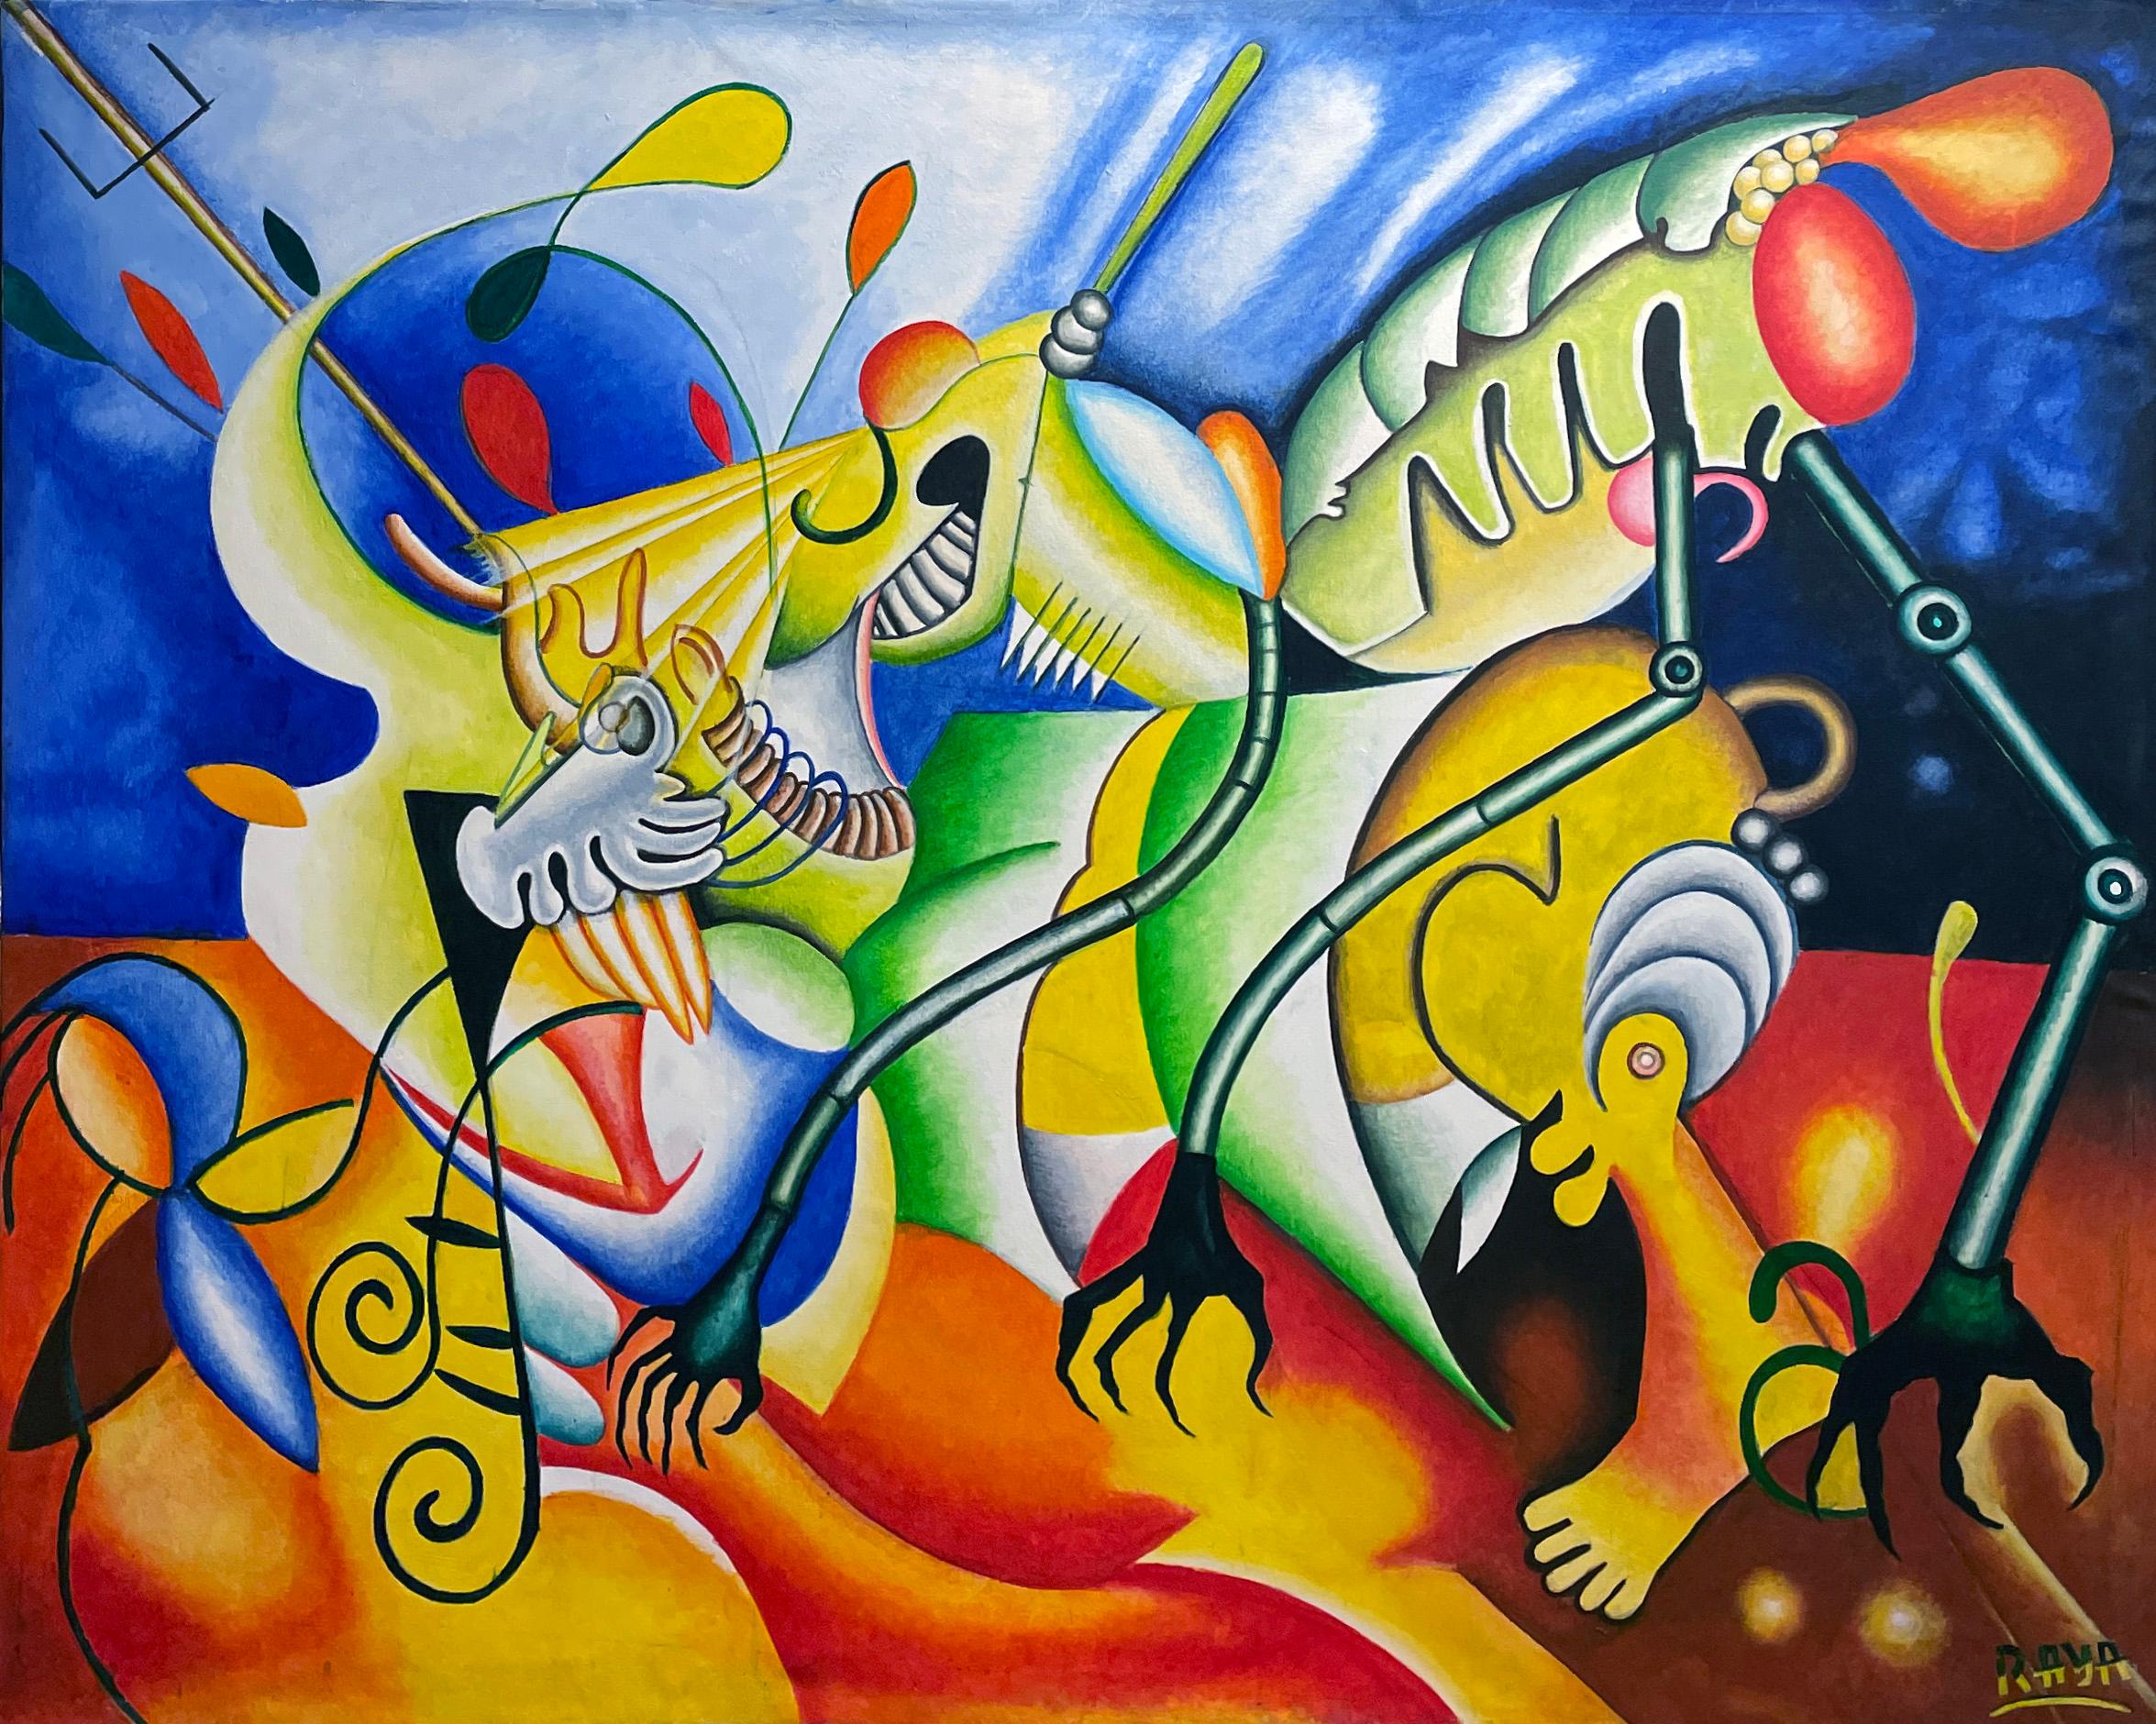 Marcos Raya Abstract Painting - Animals - Brightly Colored Abstracted Surreal Oil Painting with Animals